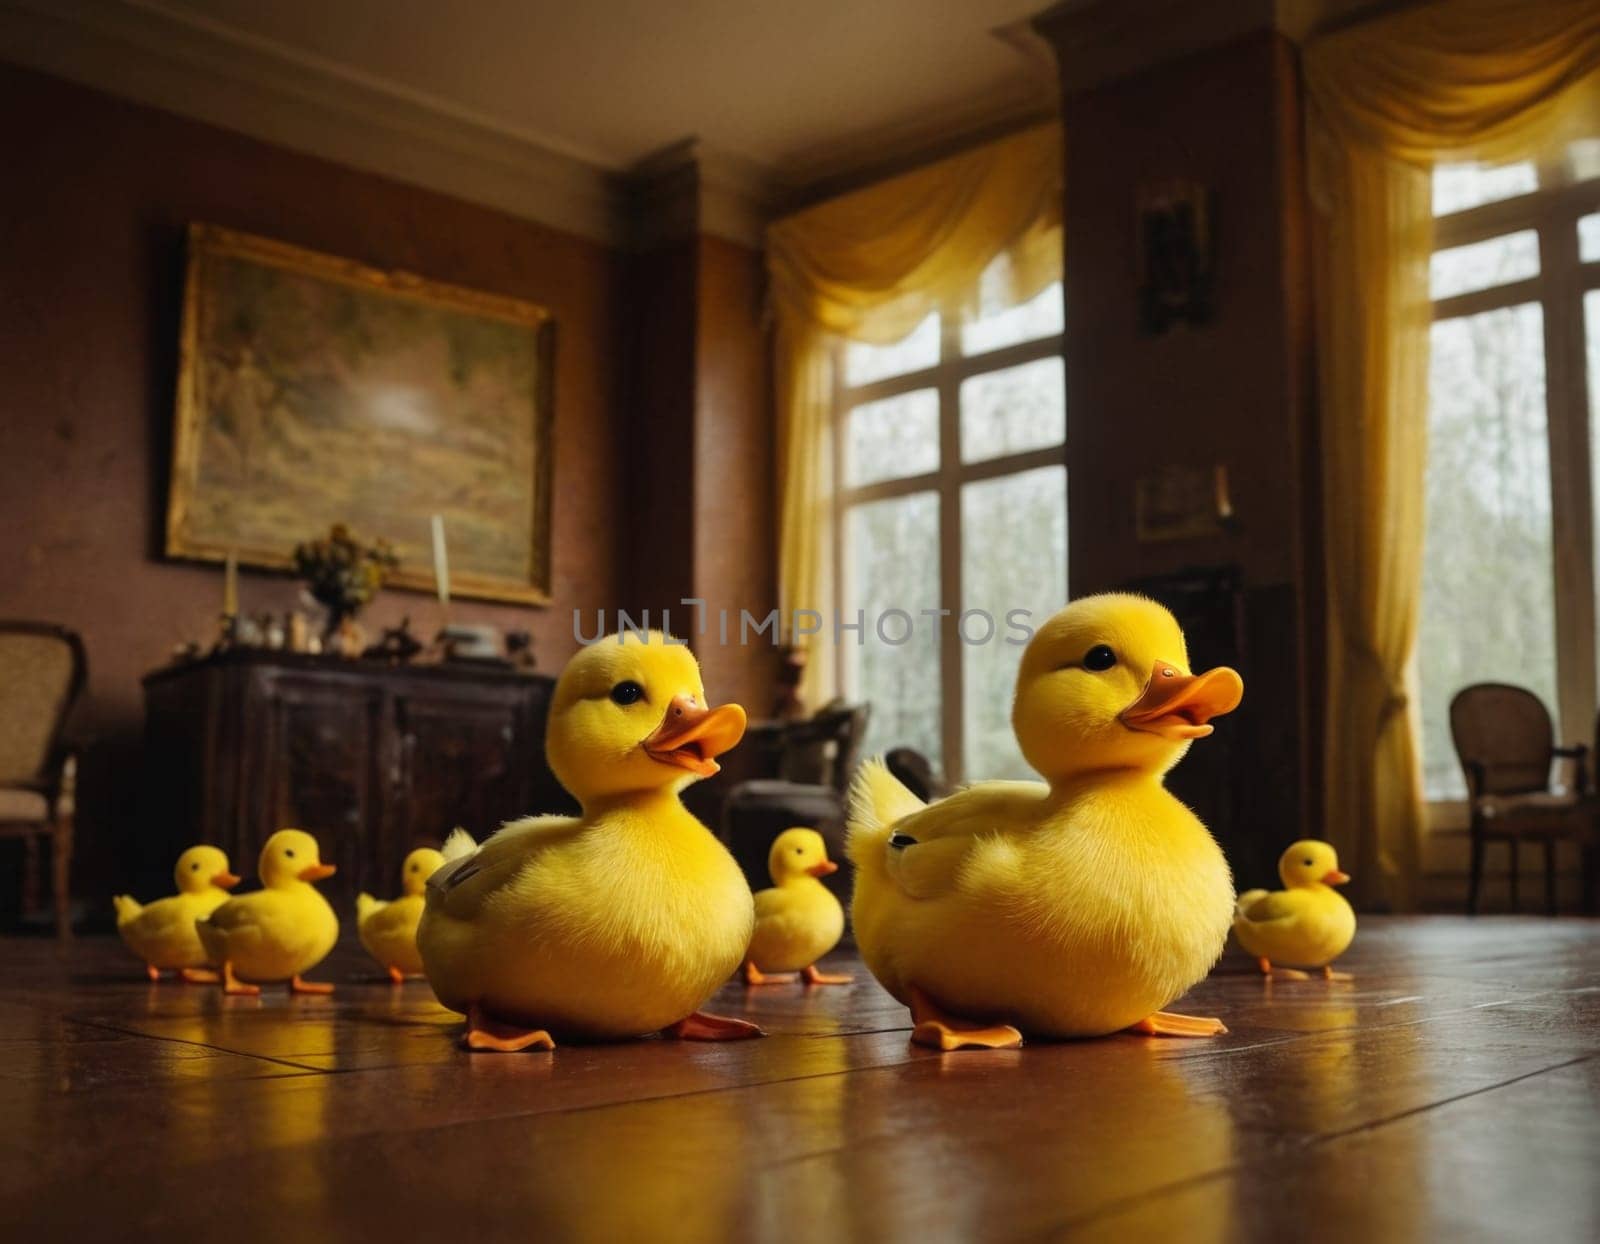 Toy ducks in the living room. by vicnt